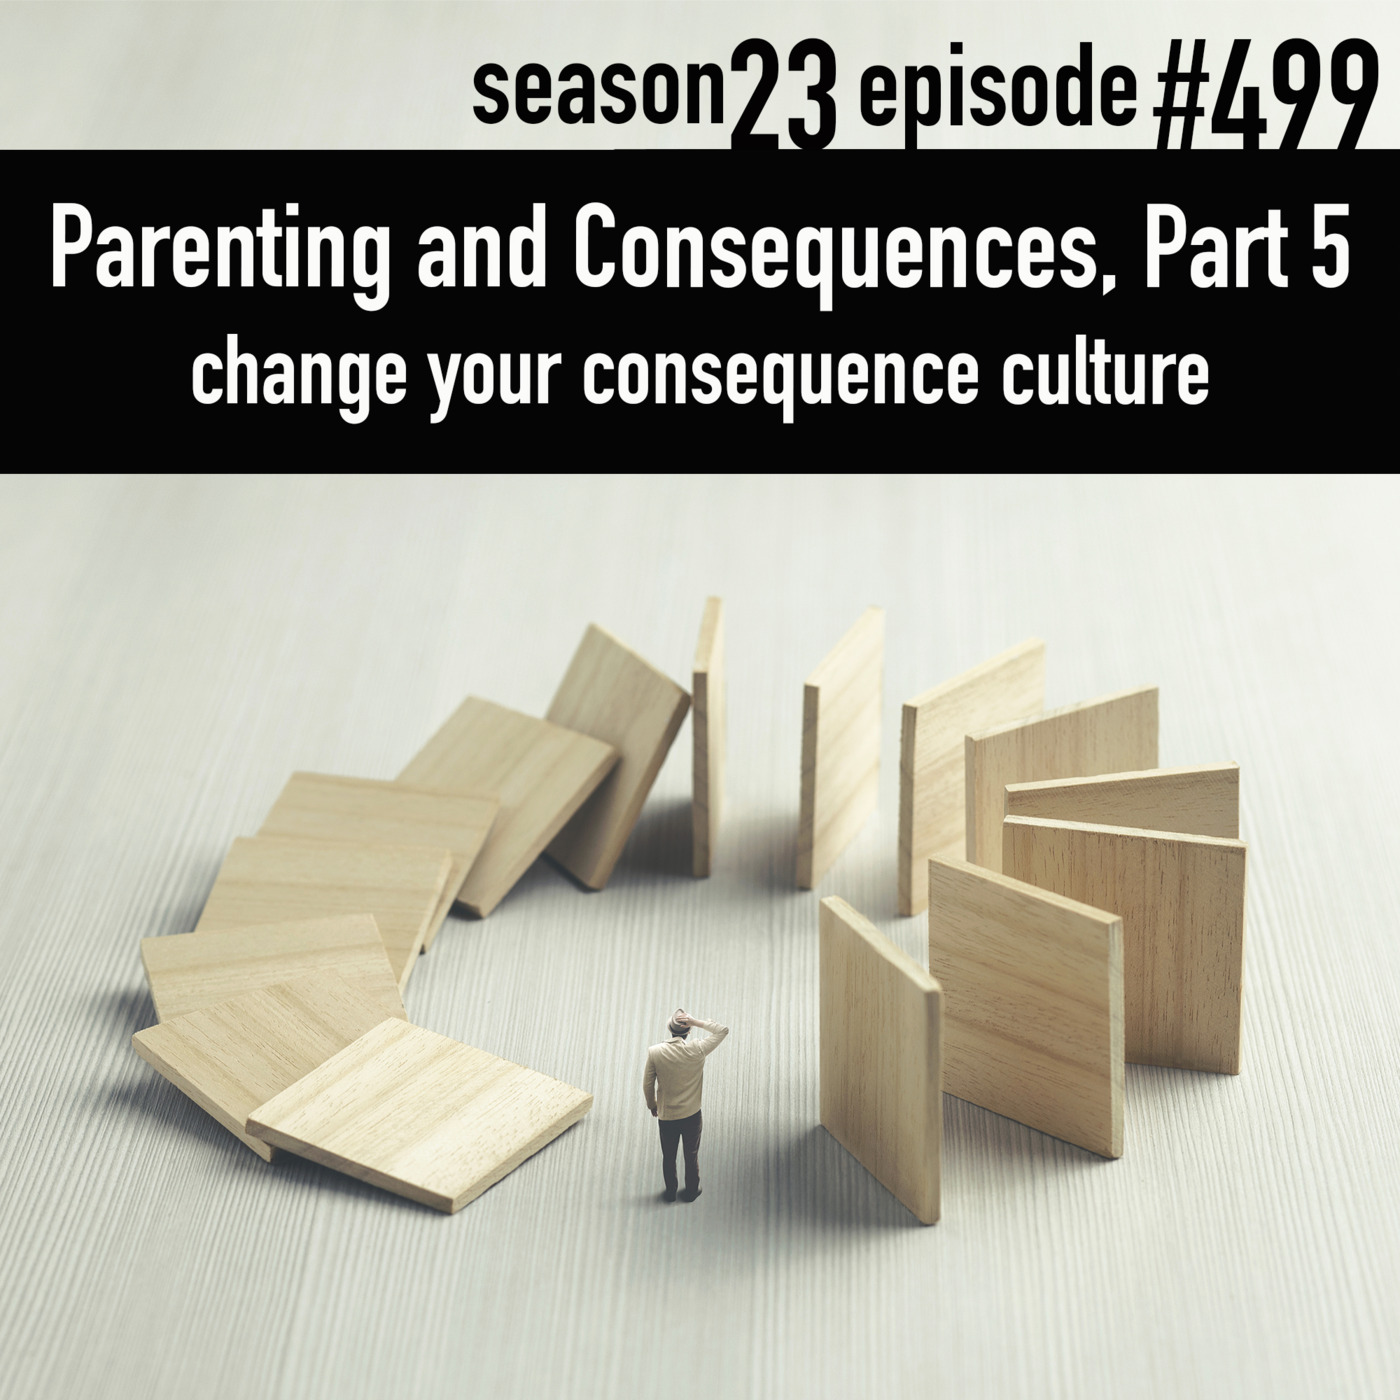 Episode 499: TLP 499: Parenting and Consequences, Part 5 | change your consequence culture